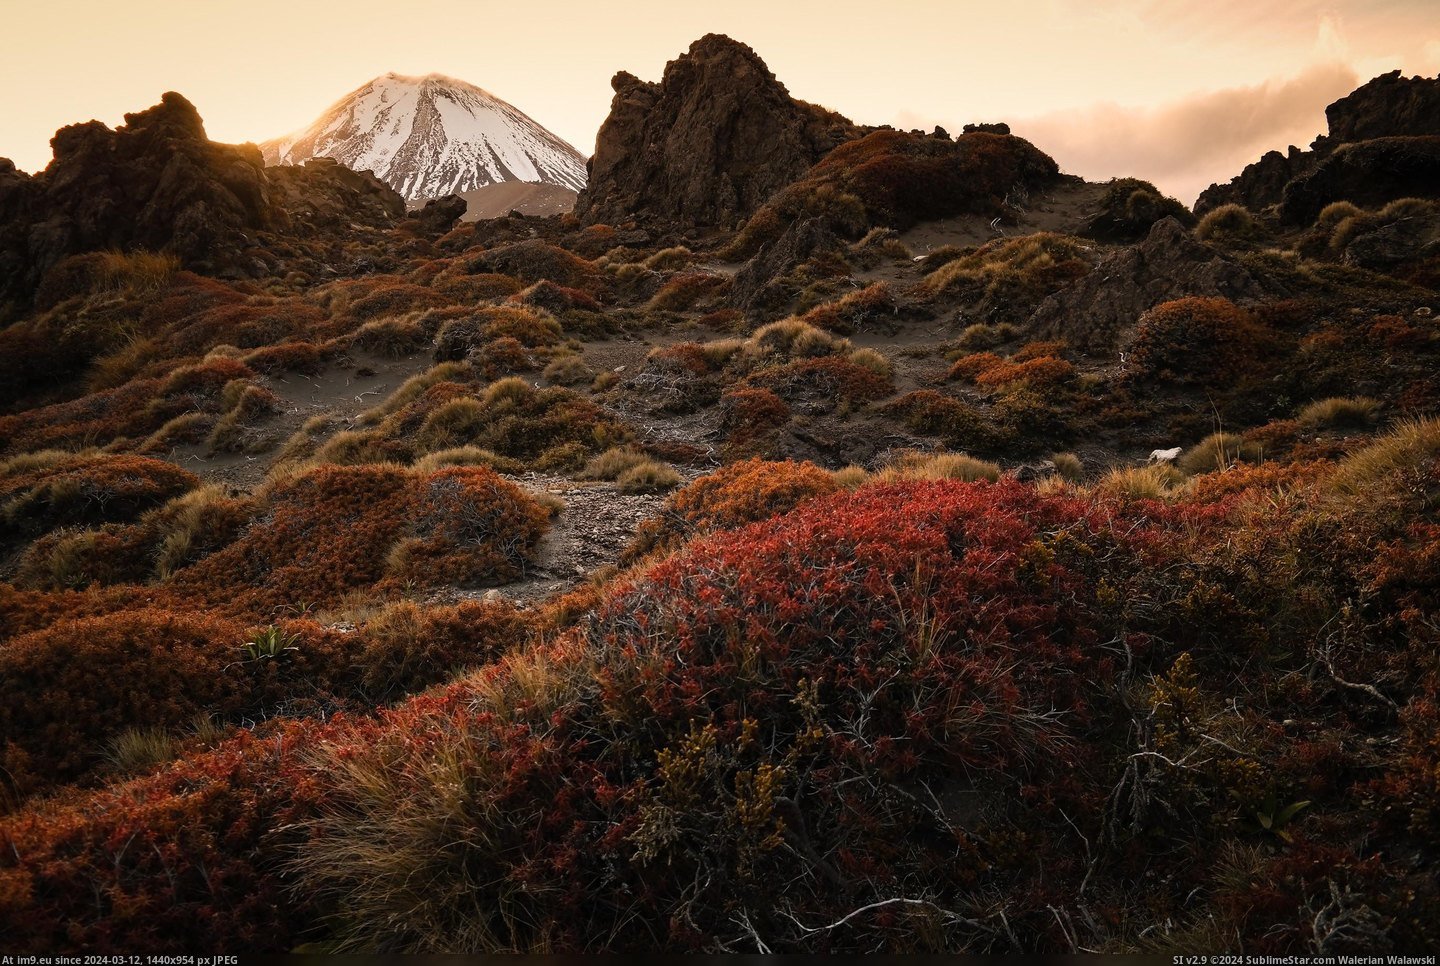 #Sun #Mount #Track #Dipping #Tongariro #Zealand #Northern [Earthporn] Probably need more New Zealand here. The sun dipping behind Mount Ngauruhoe from Oturere track, Tongariro Northern C Pic. (Bild von album My r/EARTHPORN favs))